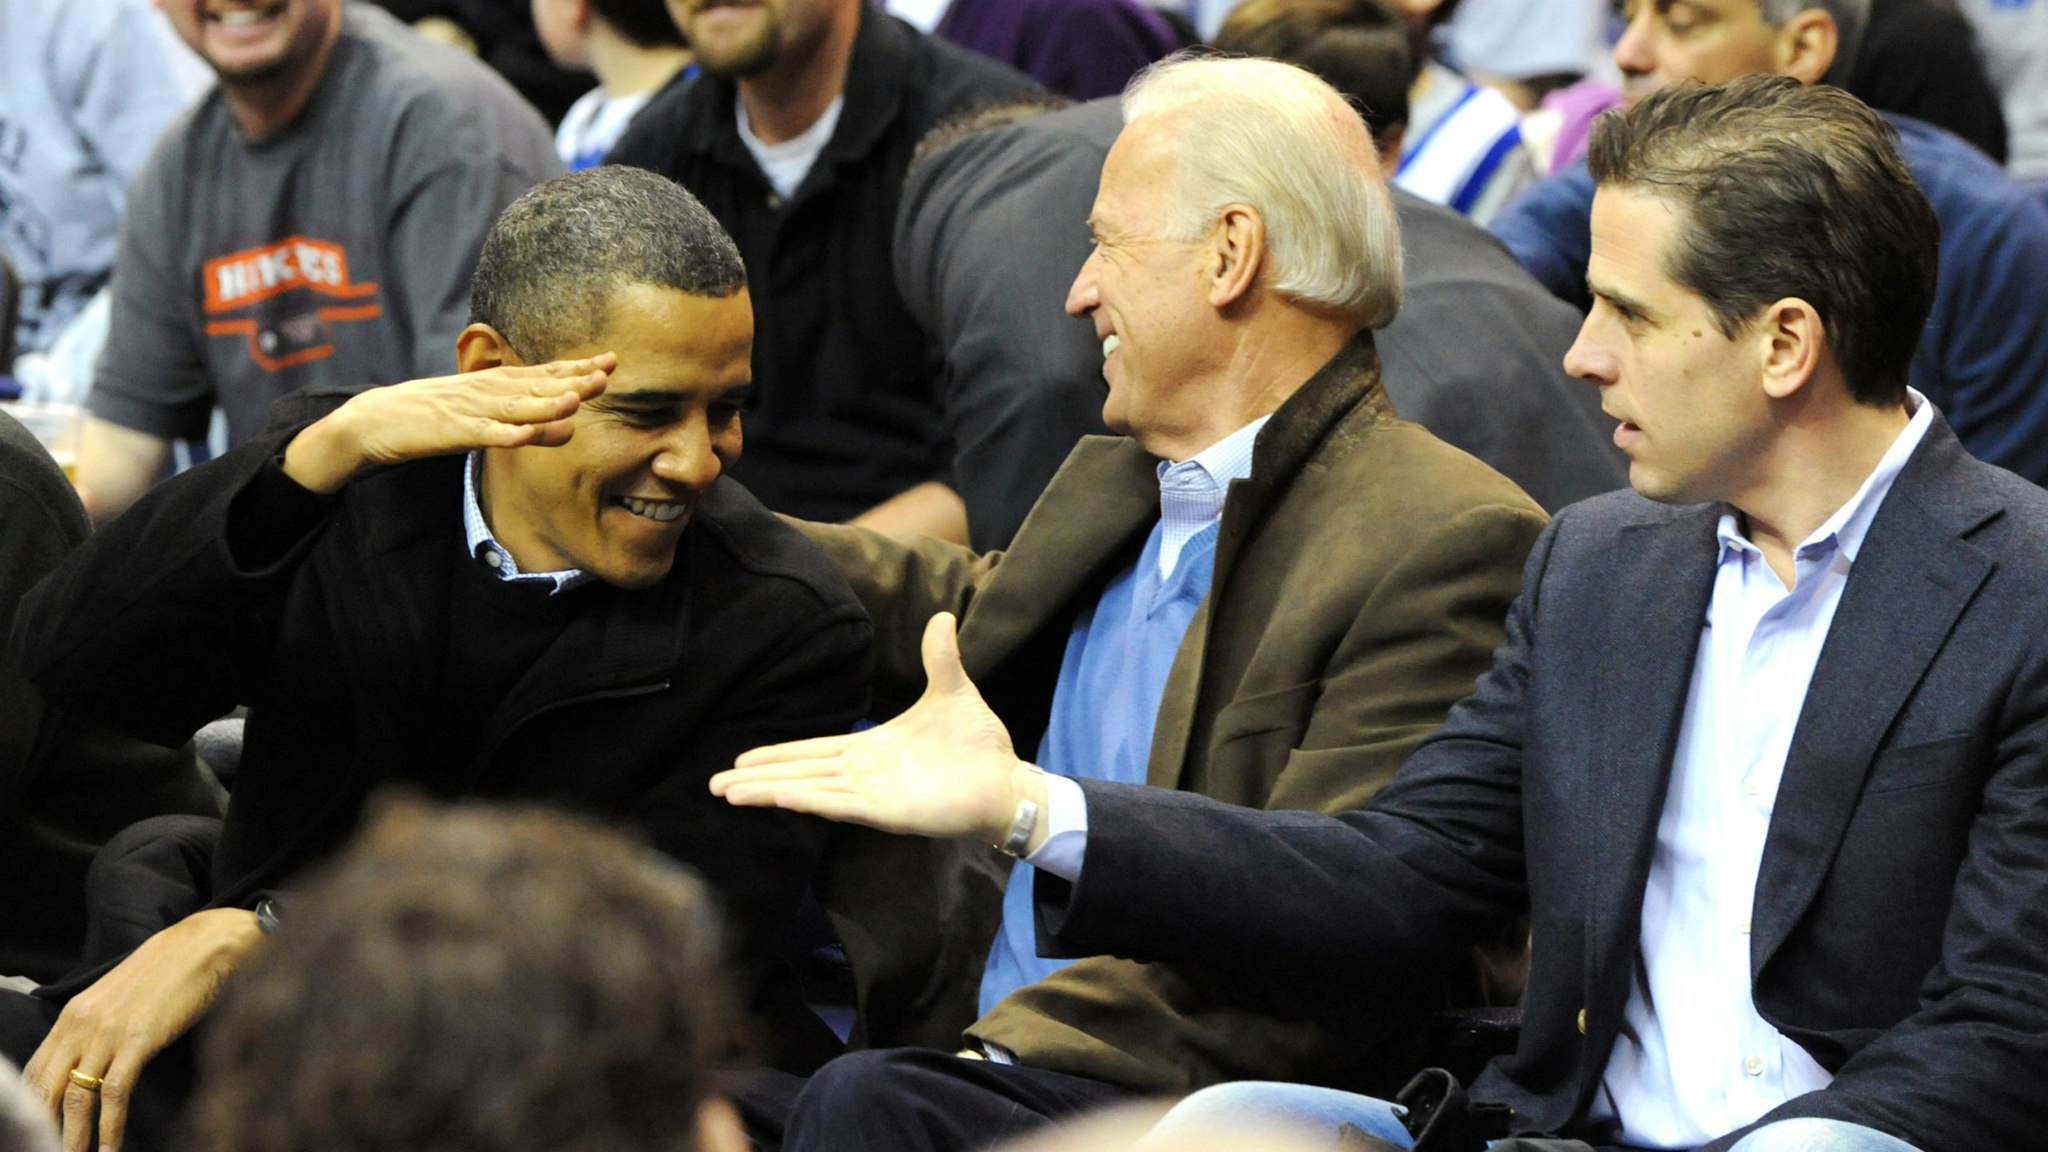 WASHINGTON - JANUARY 30: (AFP OUT) U.S. President Barack Obama (L) greets Vice President Joe Biden (C) and his son Hunter Biden as they attend the game between the Duke Blue Devils and Georgetown Hoyas on January 30, 2010 at the Verizon Center in Washington, DC.